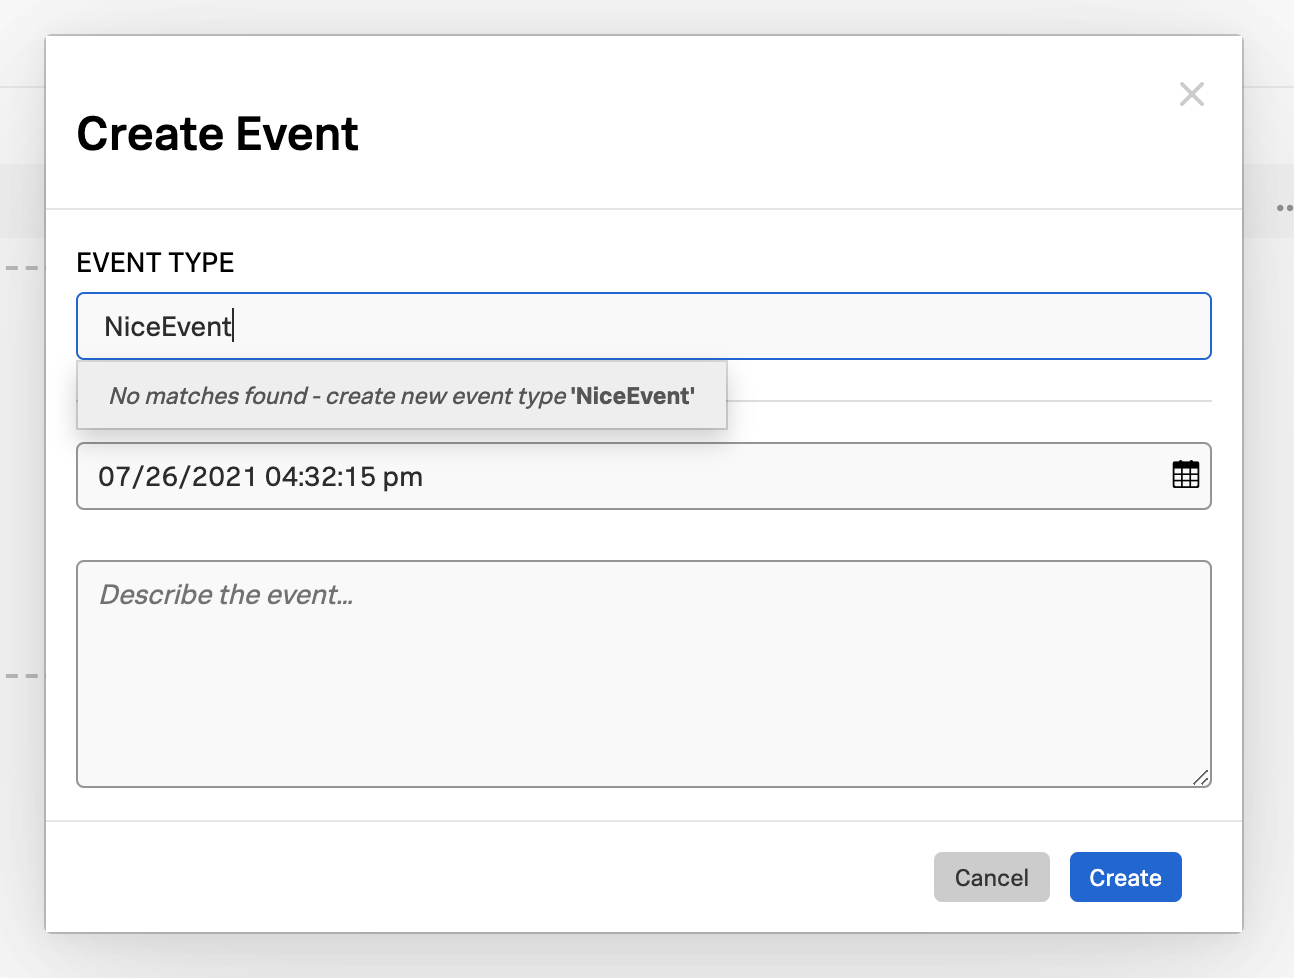 Create Event dialog box with sample event type